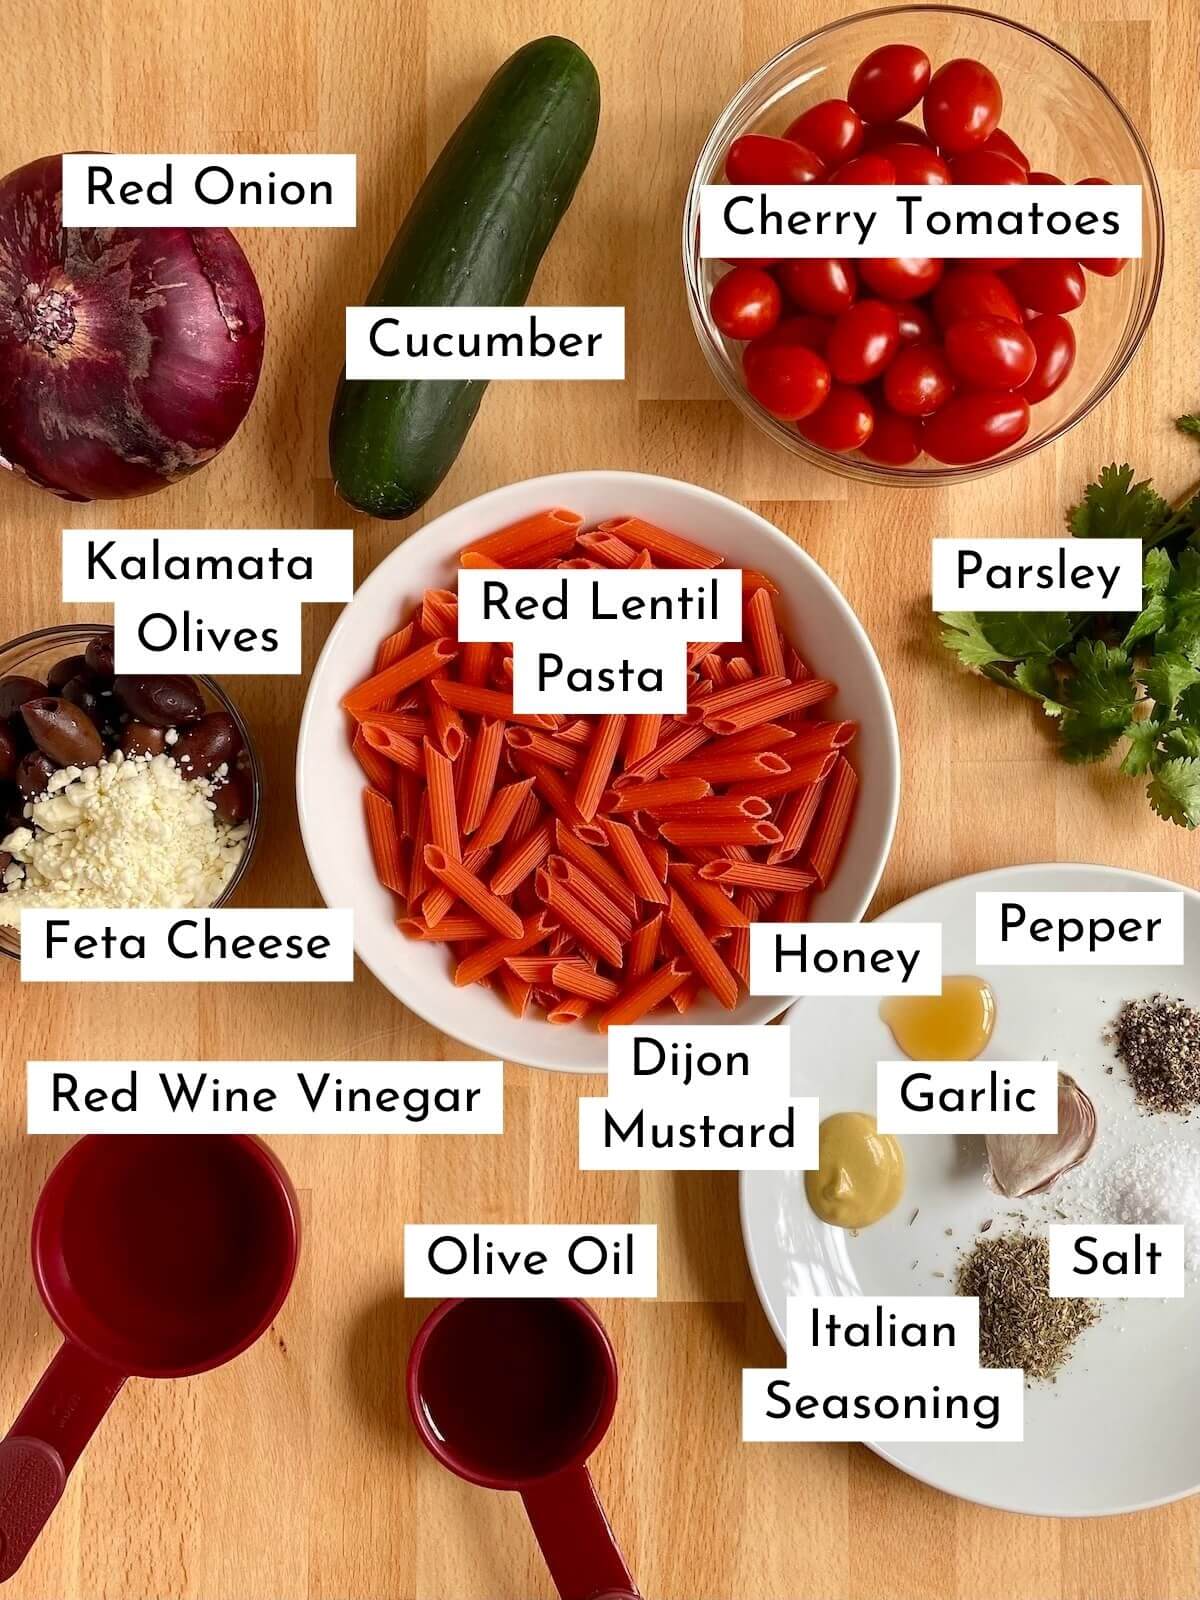 The ingredients to make red lentil pasta laid out on a butcher block countertop. There is text over each individual ingredient that states the name of each ingredient. The ingredients consist of red onion, cucumber, cherry tomatoes, Kalamata olives, feta cheese, red lentil pasta, parsley, red wine vinegar, olive oil, dijon mustard, honey, garlic, Italian seasoning, salt, and pepper.